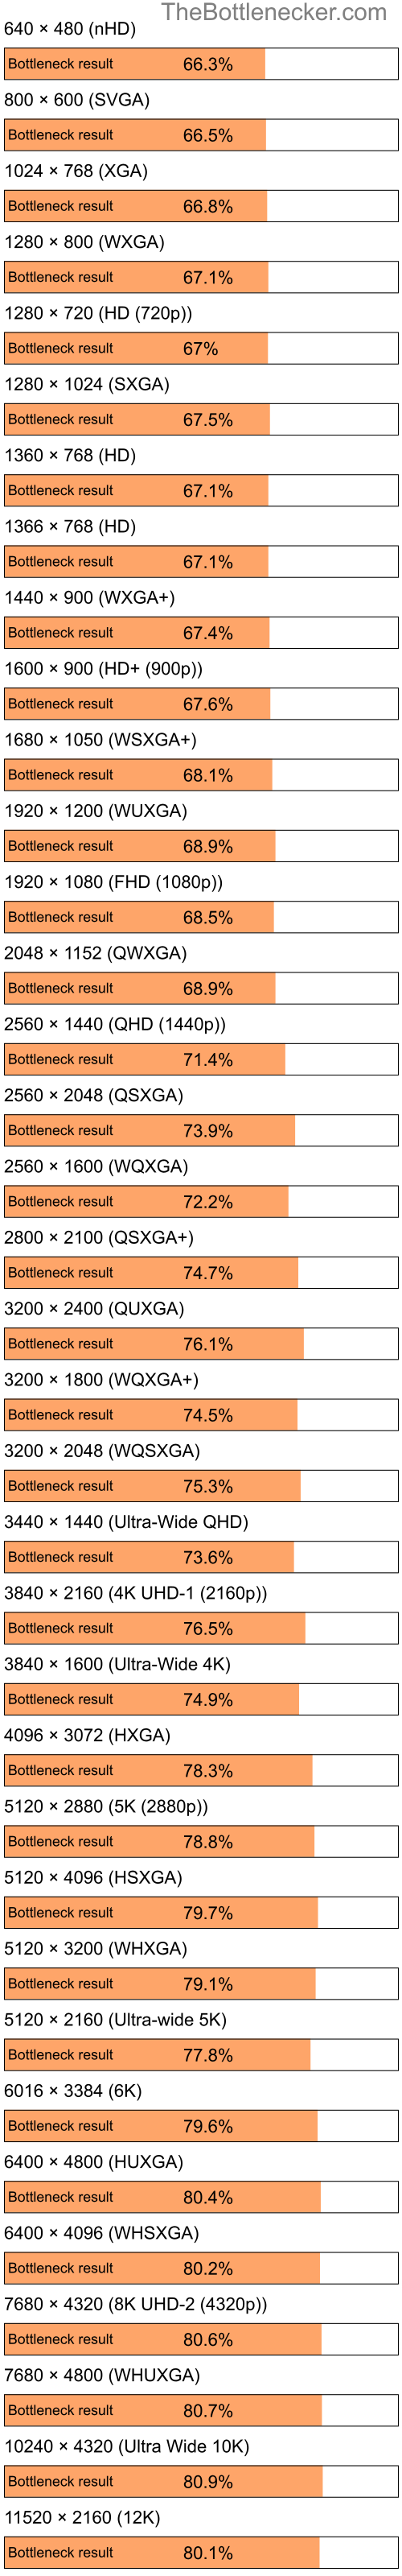 Bottleneck results by resolution for Intel Celeron M 410 and AMD M860G with Mobility Radeon 4100 in General Tasks